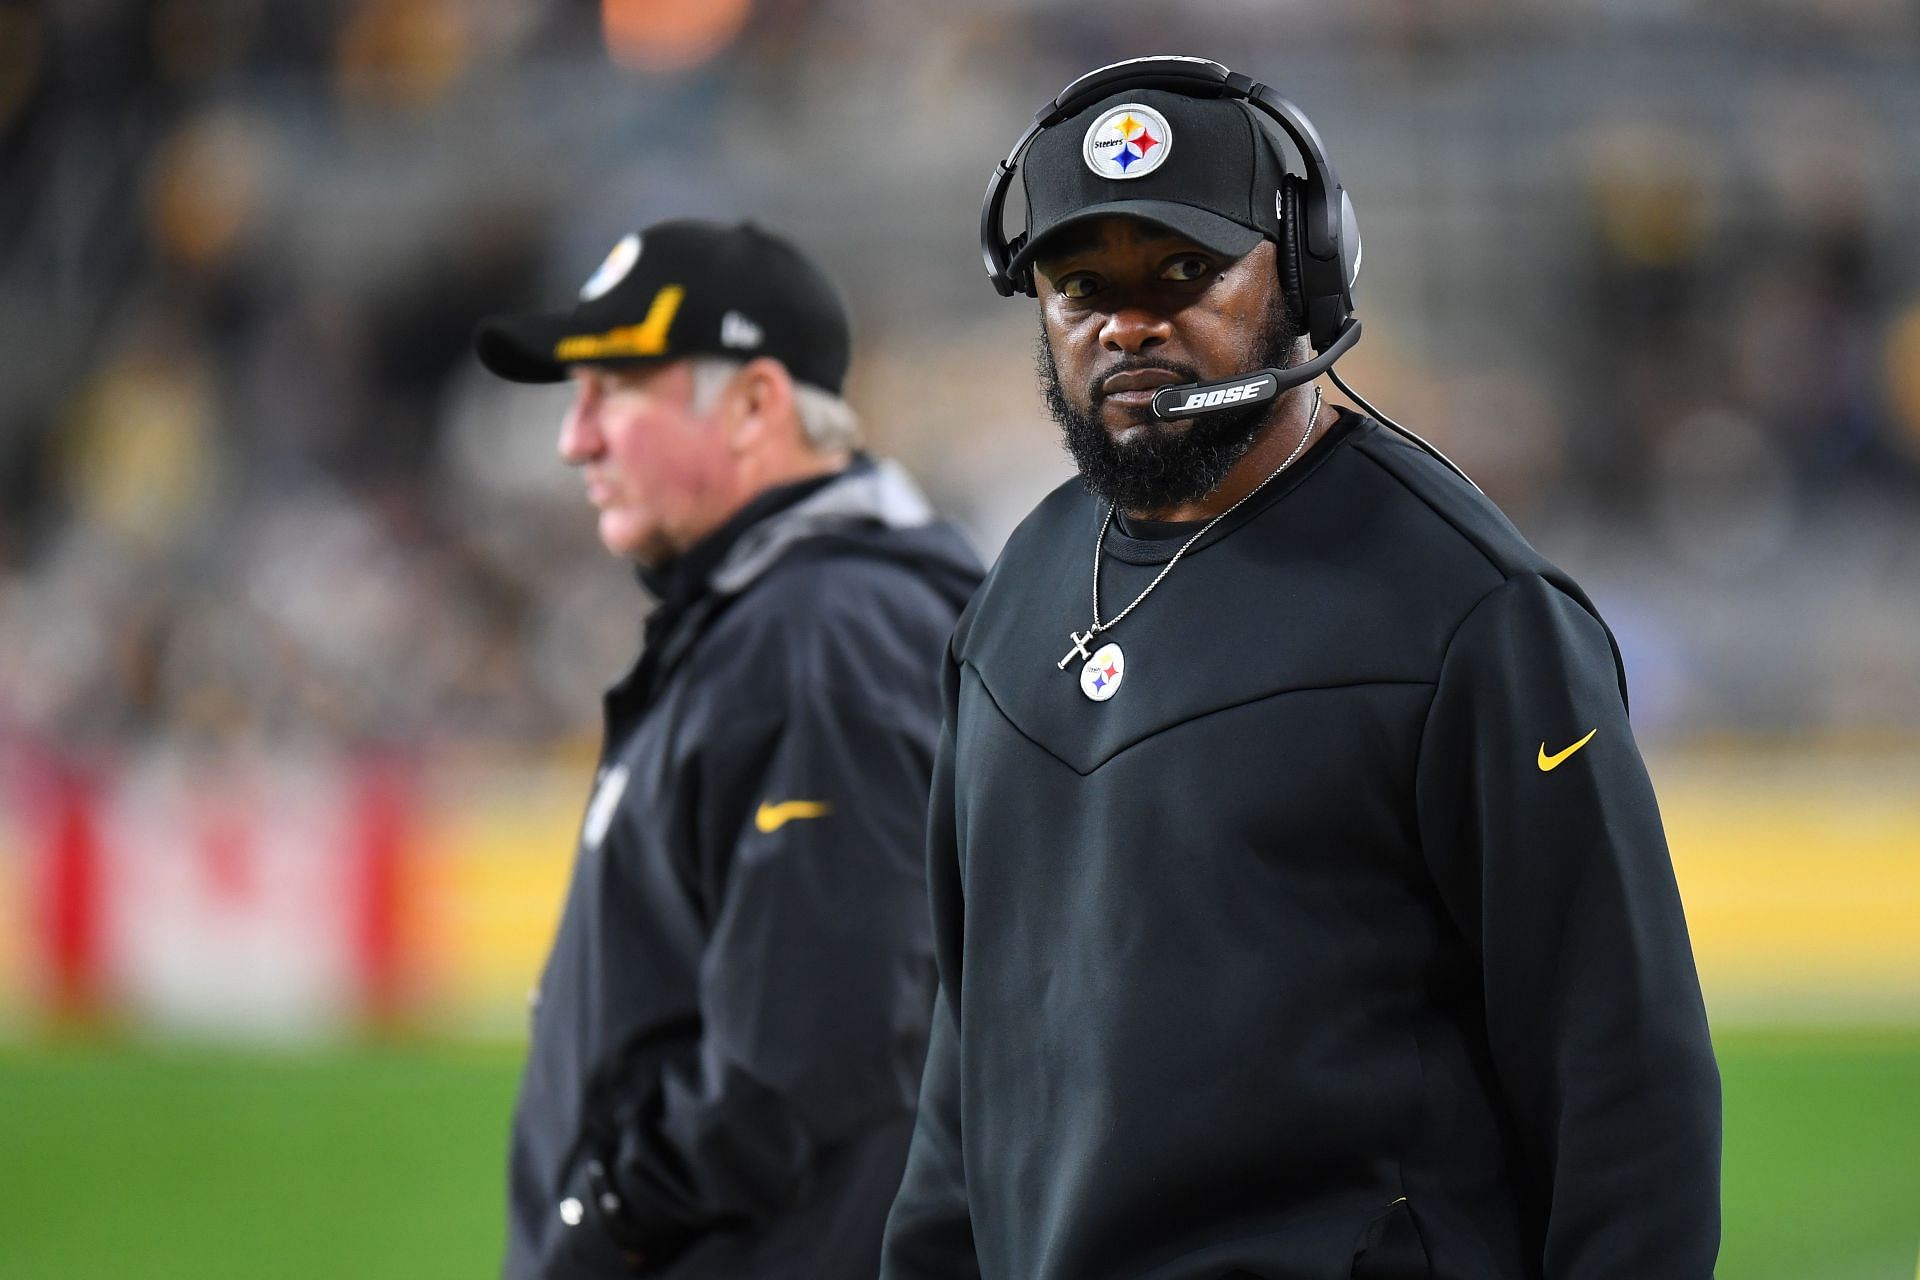 Mike Tomlin was not happy with the officials after the game